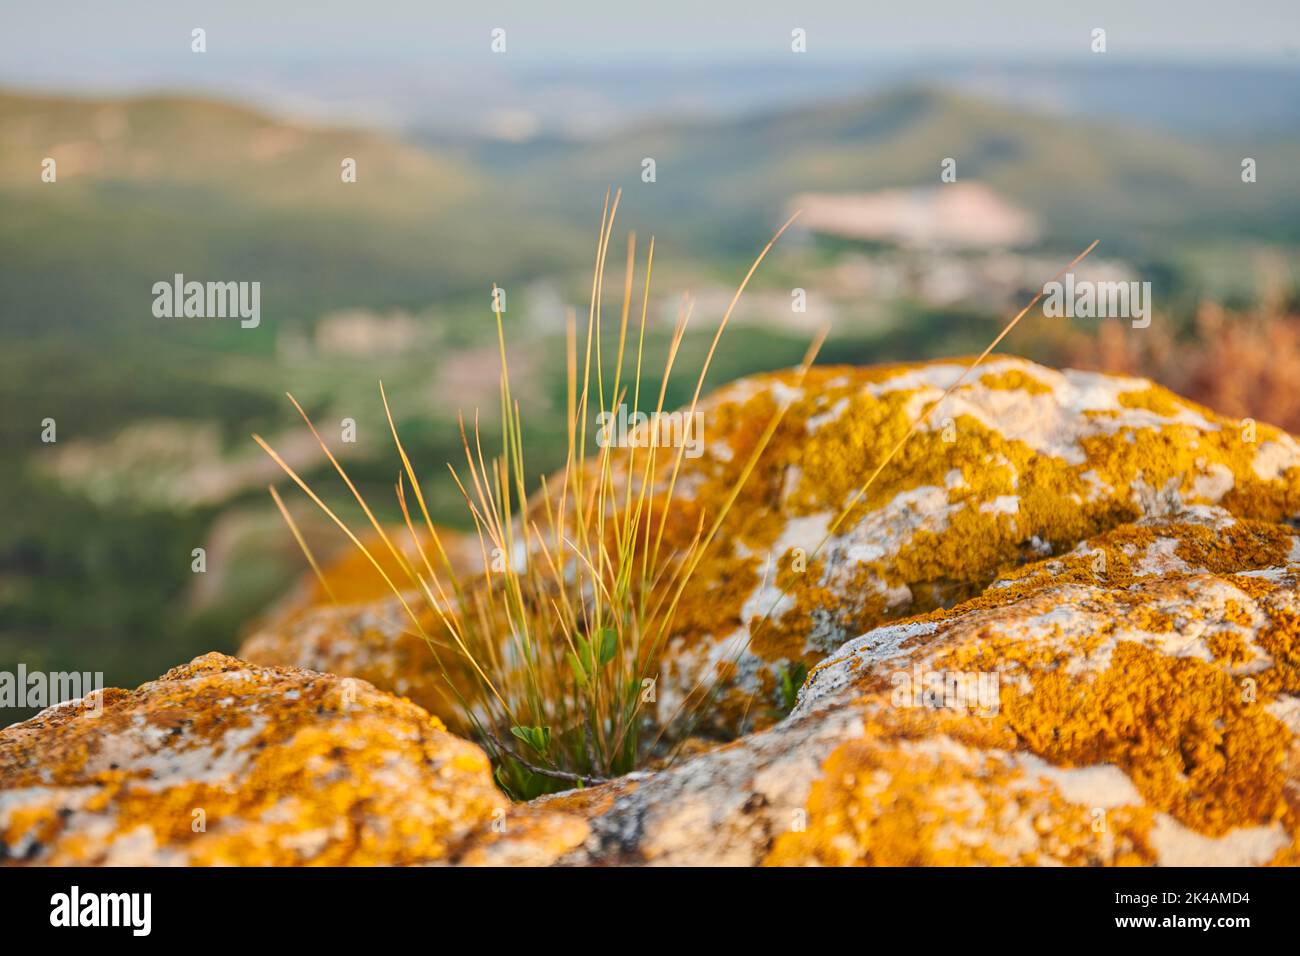 Sheep's fescue (Festuca ovina) growing at Mount 'La Talaia del Montmell' at evening, Catalonia, Spain Stock Photo